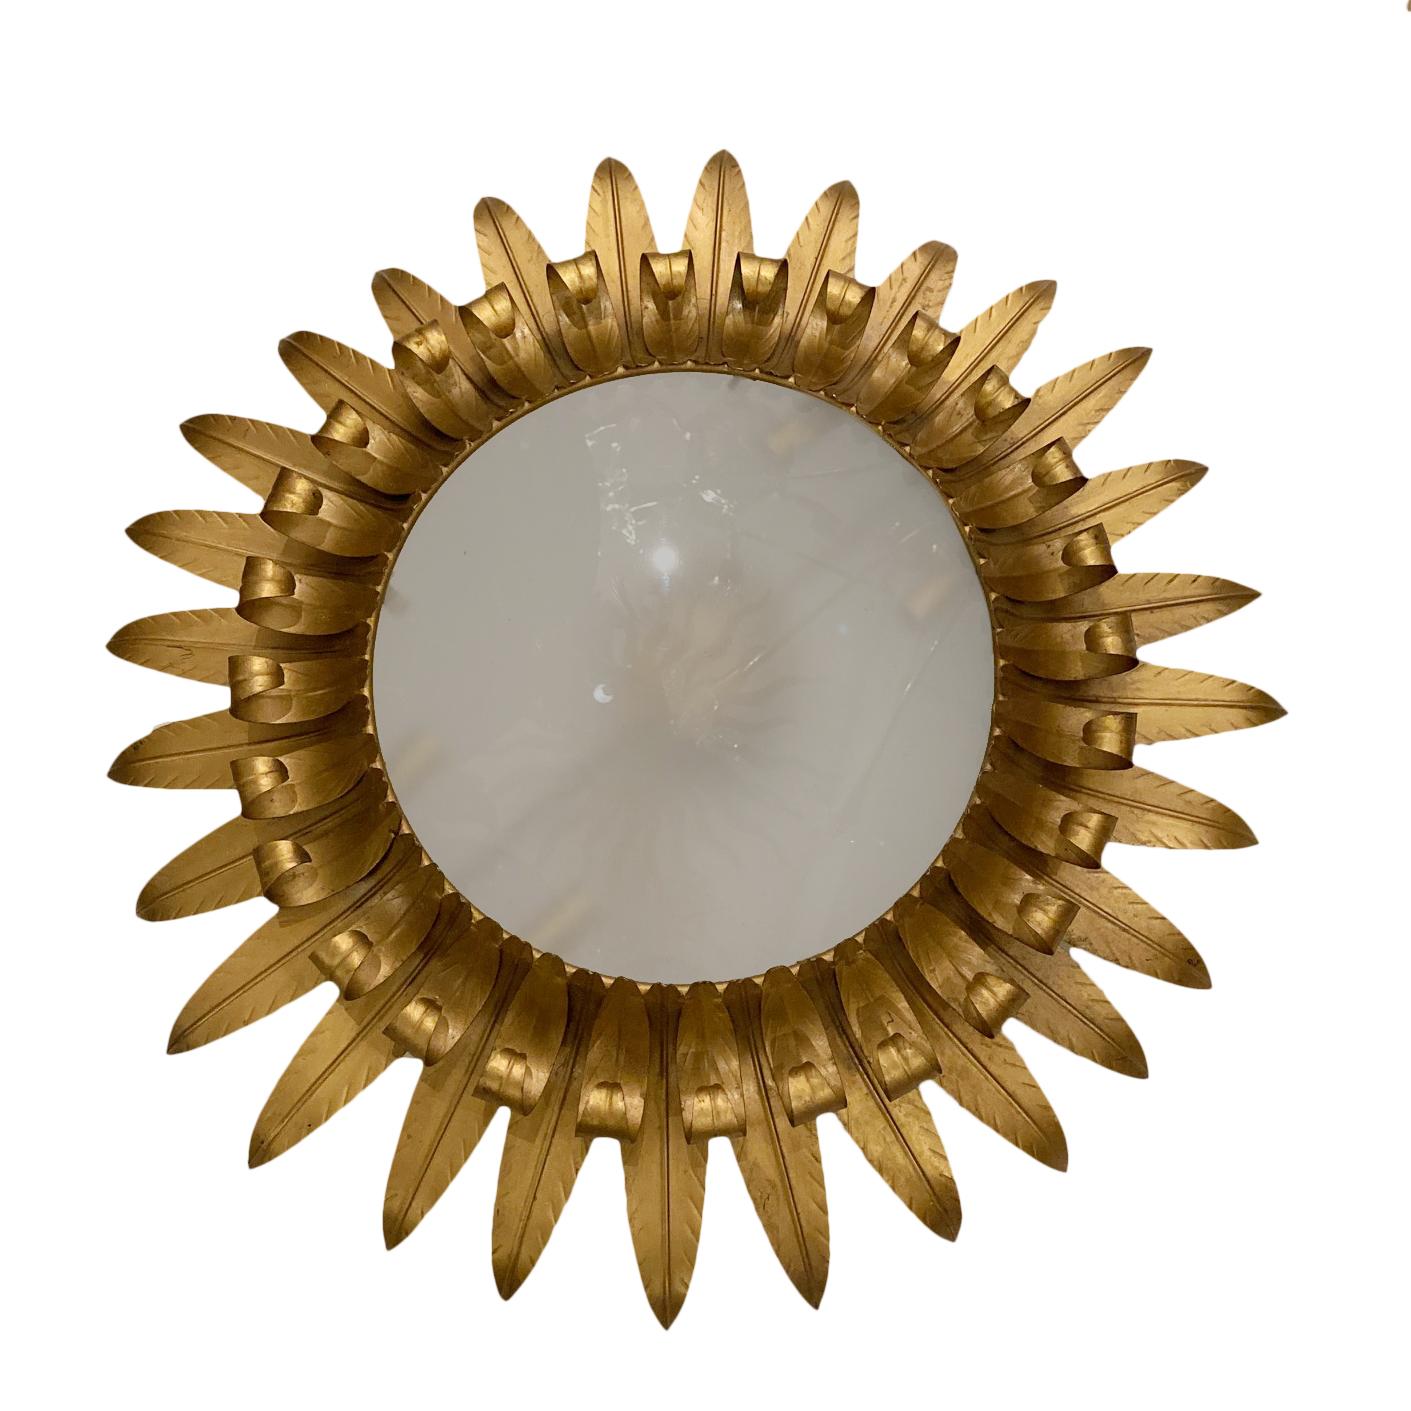 A circa 1950s French sunburst shaped light fixture with frosted glass inset.

Measurements:
Diameter 26